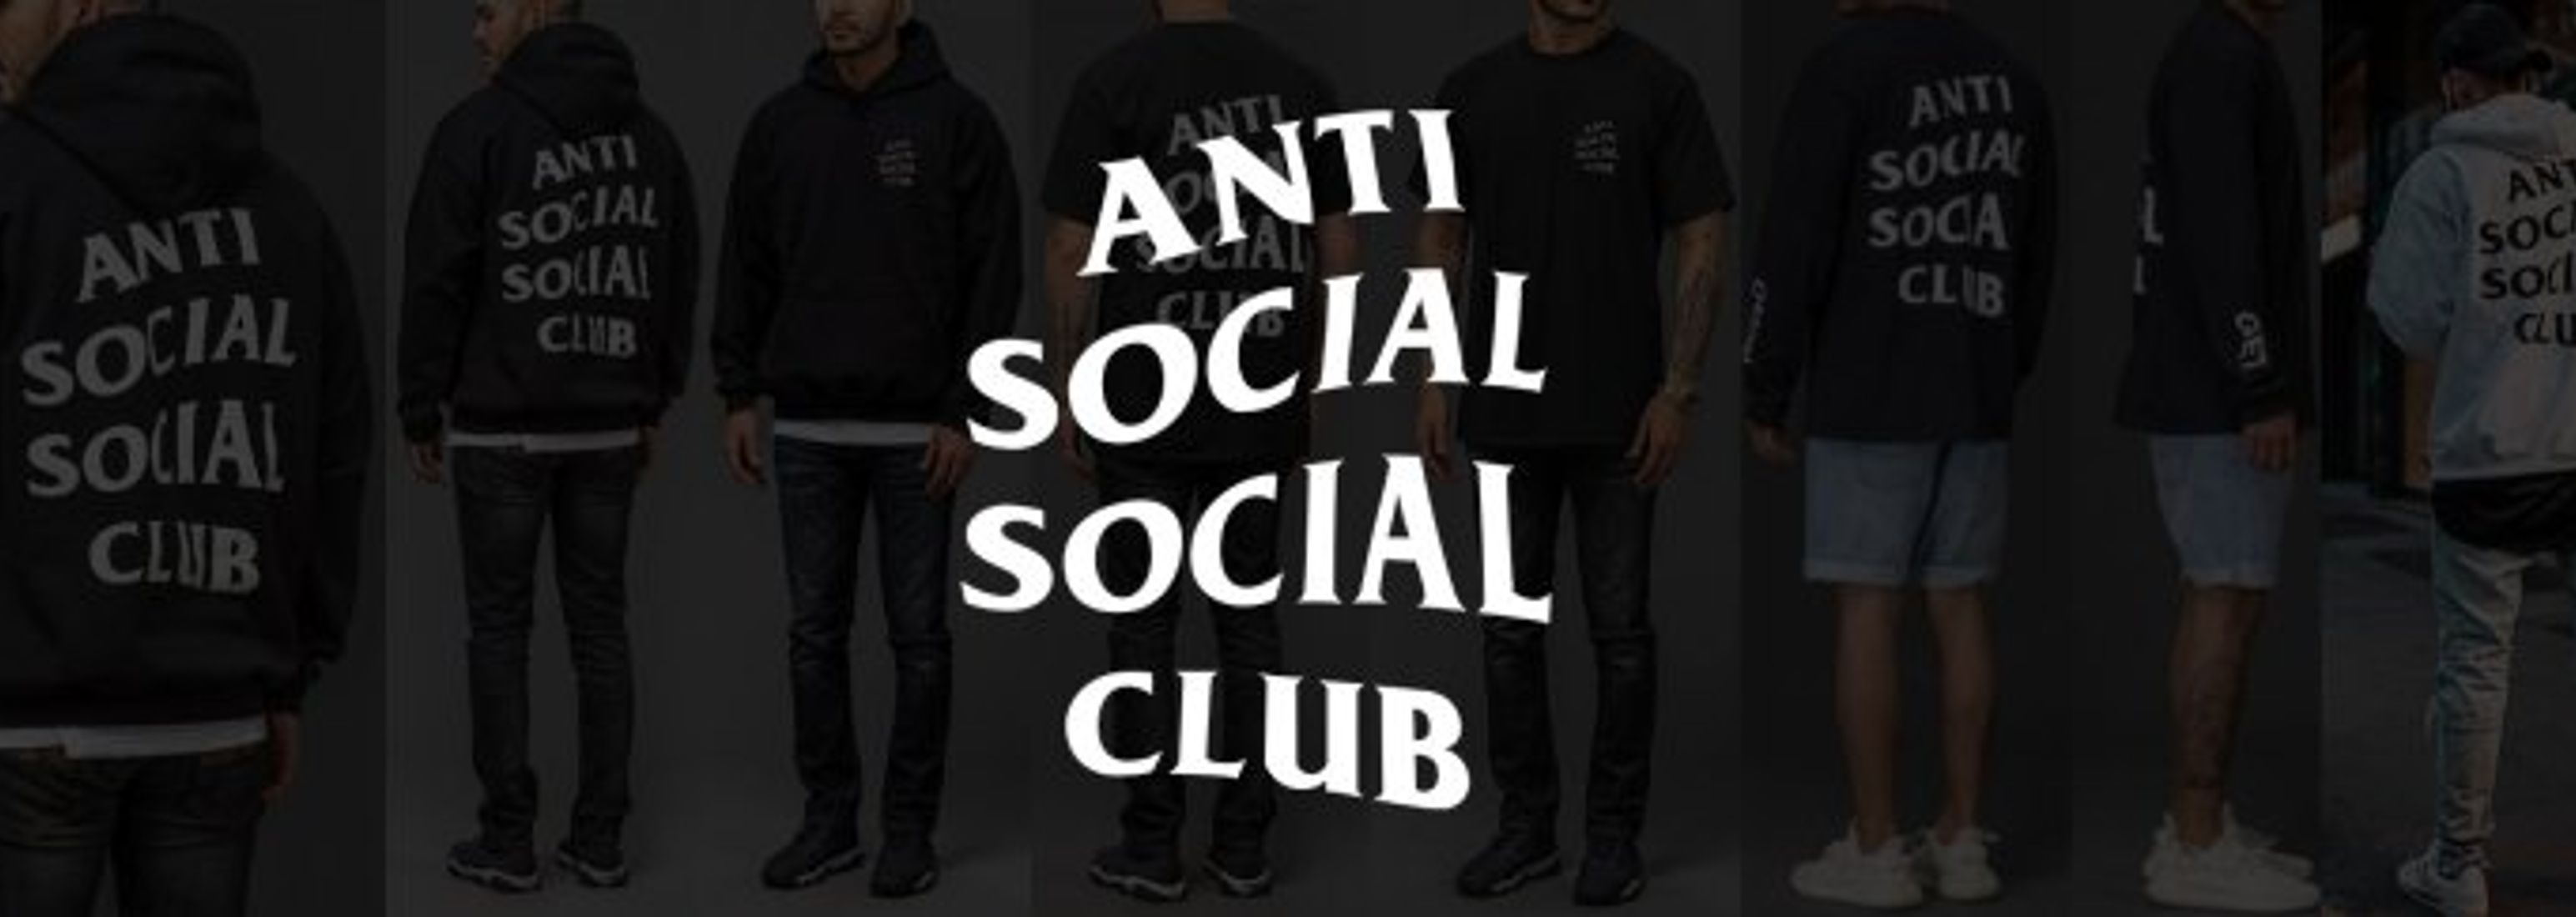 Antisocial social club shop Jobs & Projects | The Dots